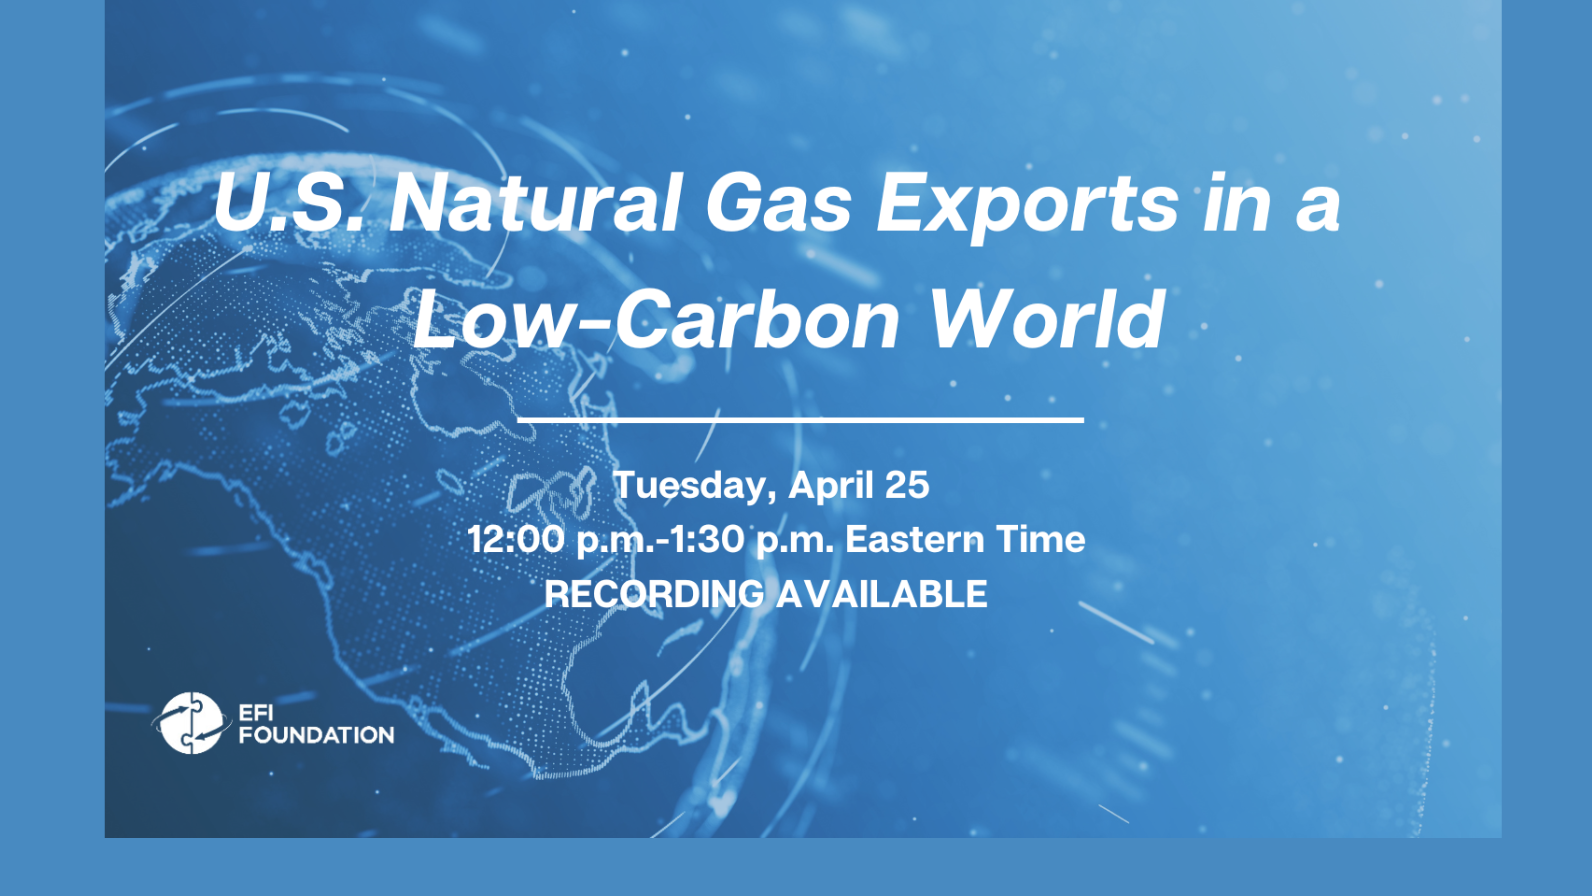 U.S. Natural Gas Exports in a Low-Carbon World Tuesday, April 25 12:00 p.m. to 1:30 p.m. Eastern Time Recording Available